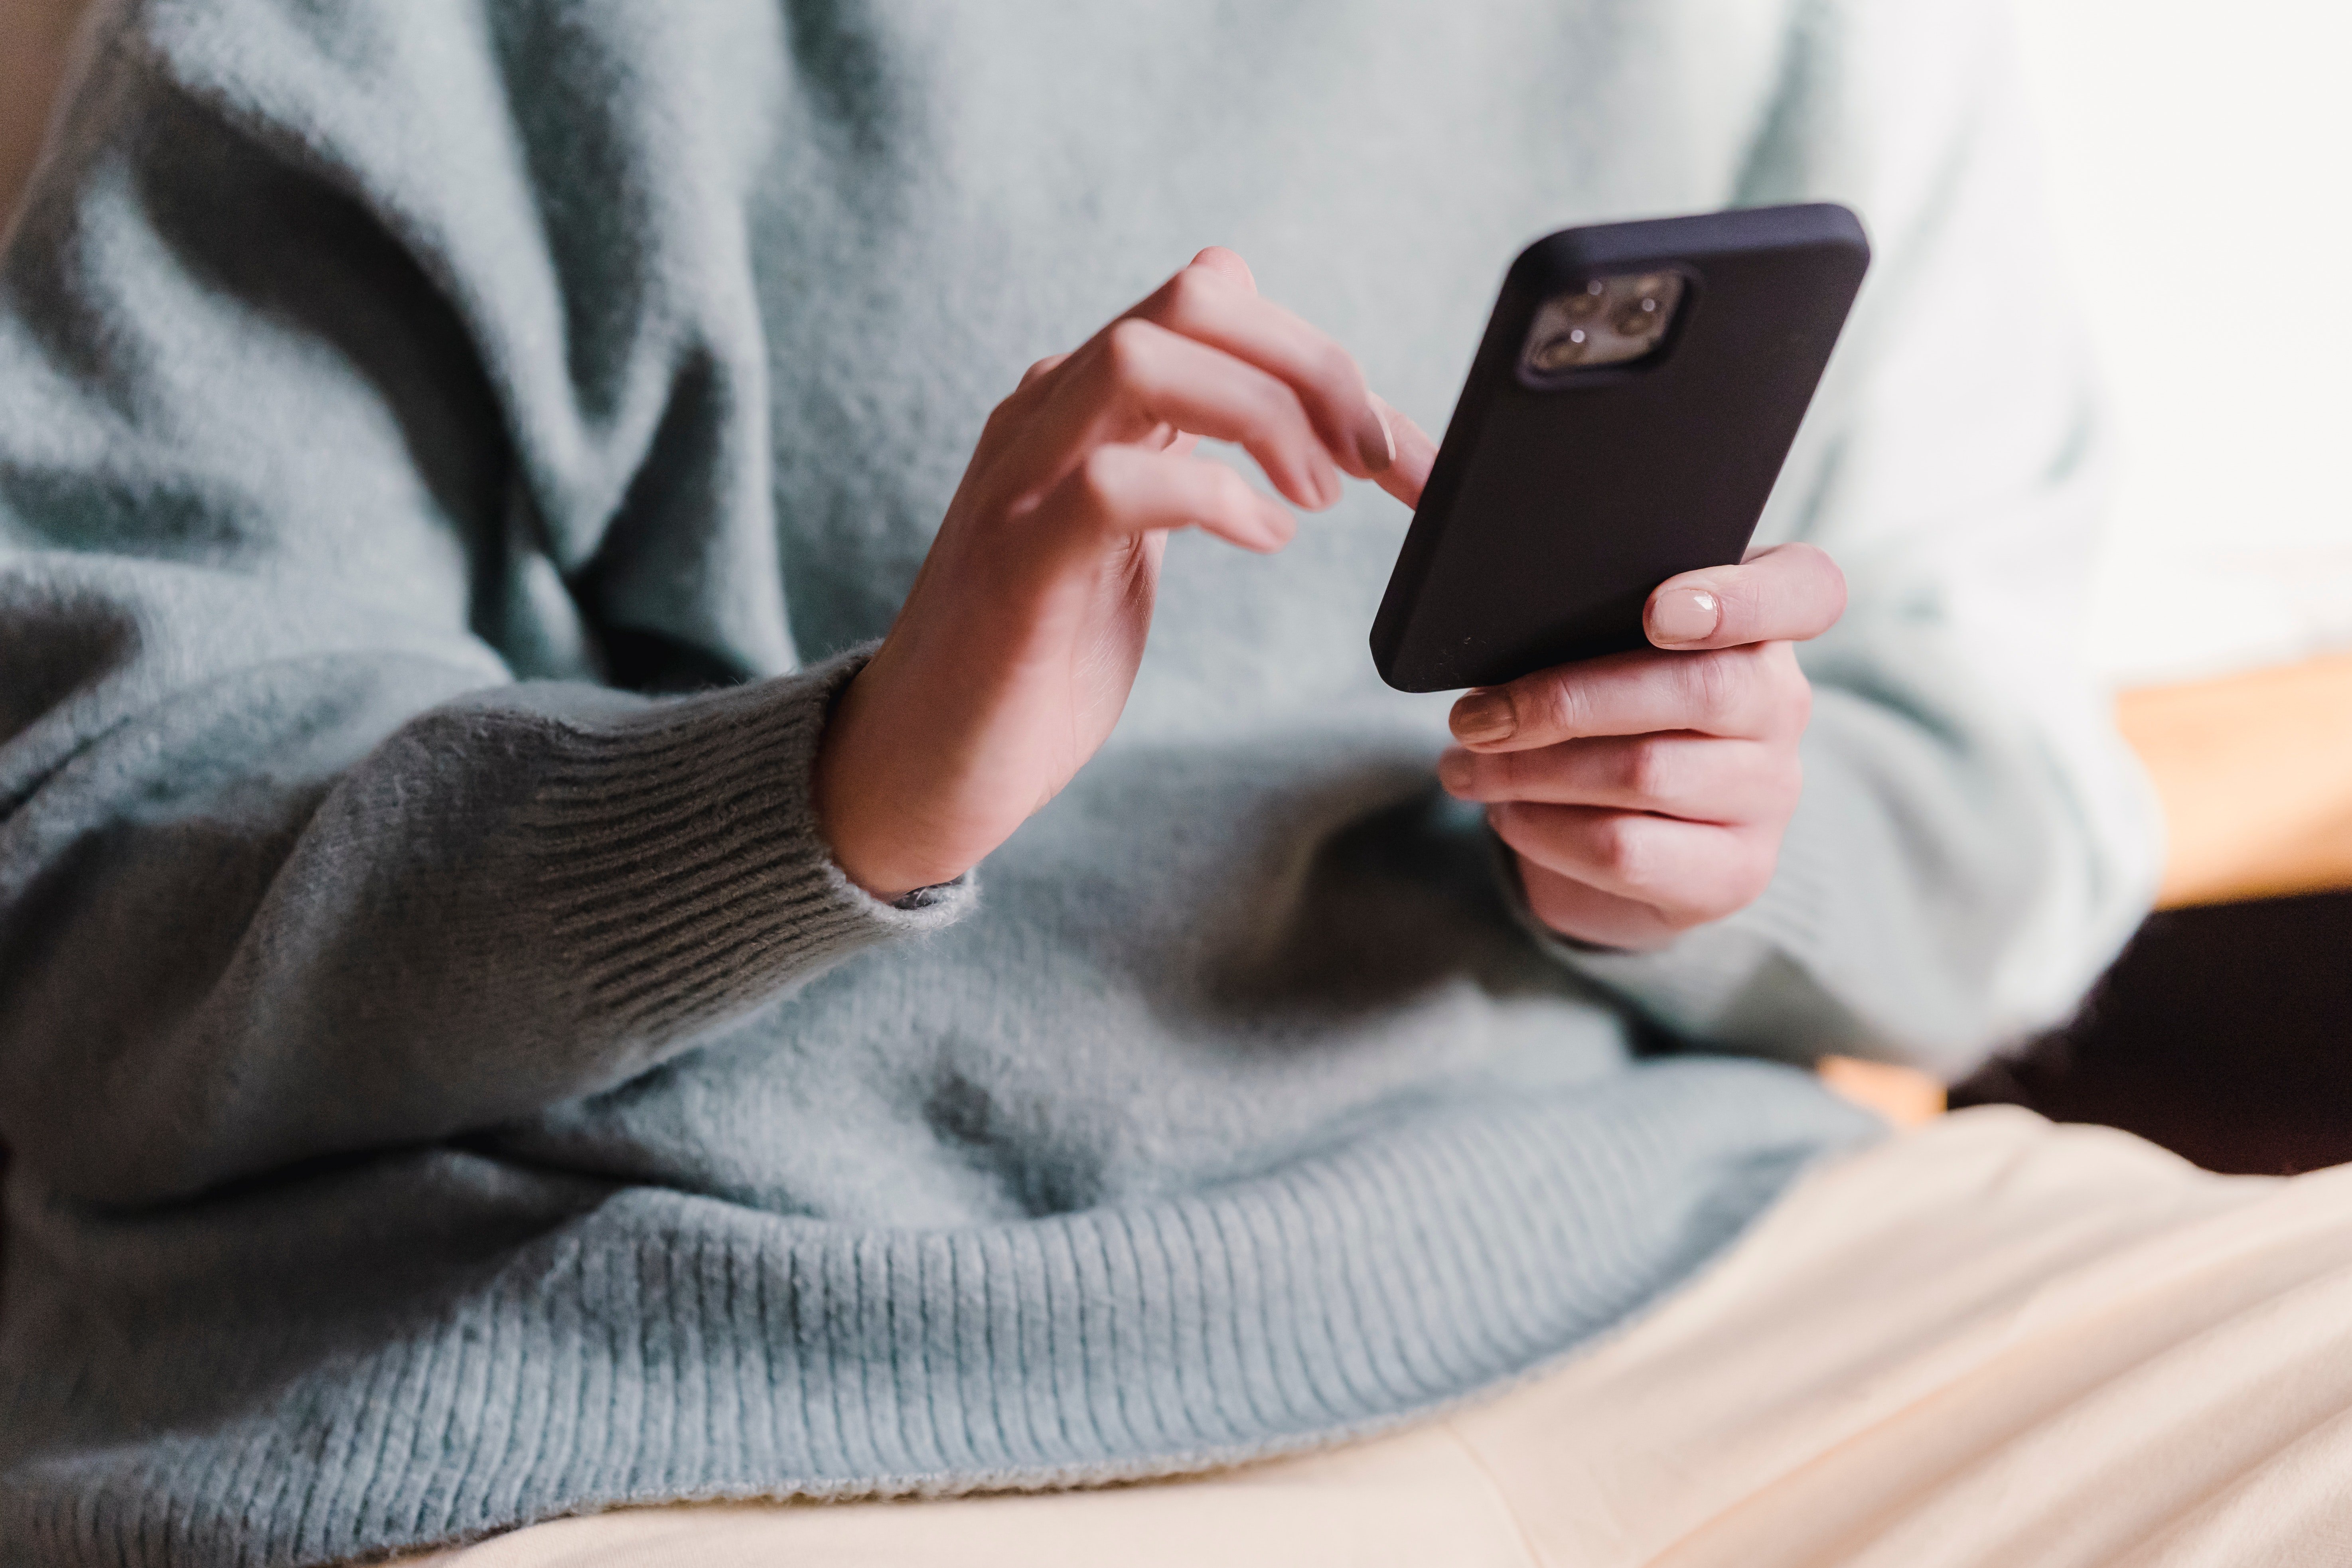 A woman using a smartphone | Source: Pexels